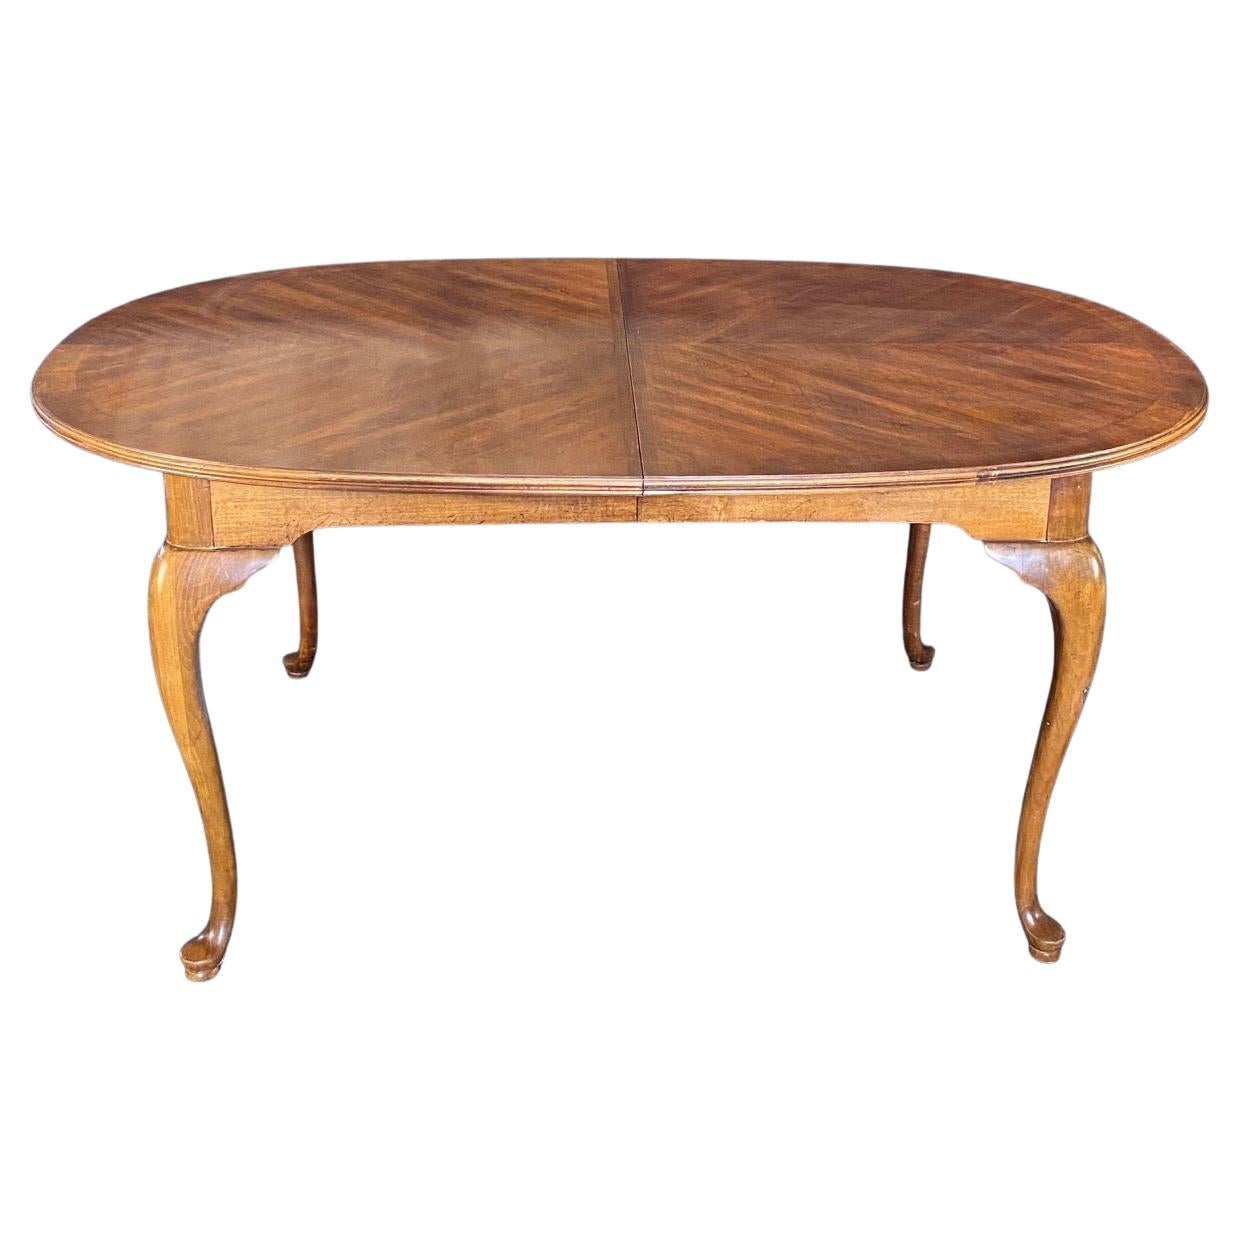 Lovely British Georgian Court Style Queen Anne Dining Table For Sale